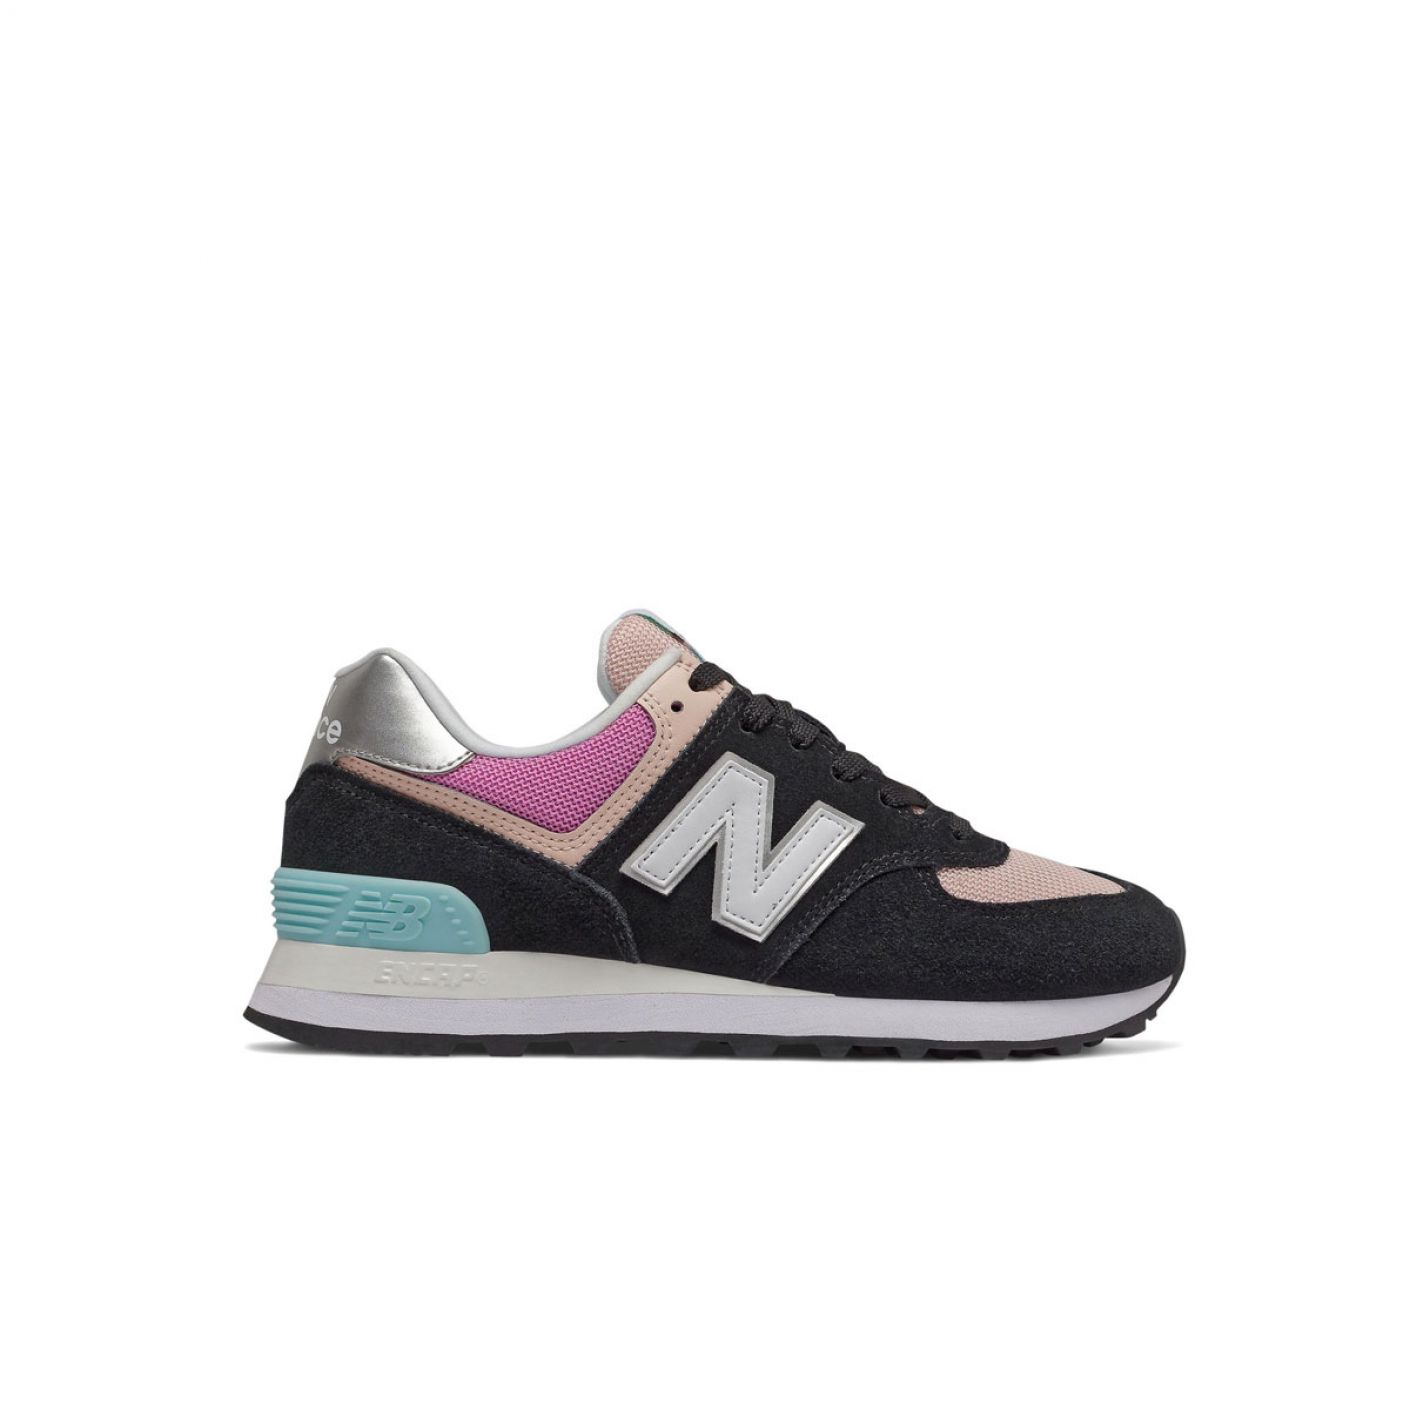 New Balance 574 Suede Black with Madder Rose for Women